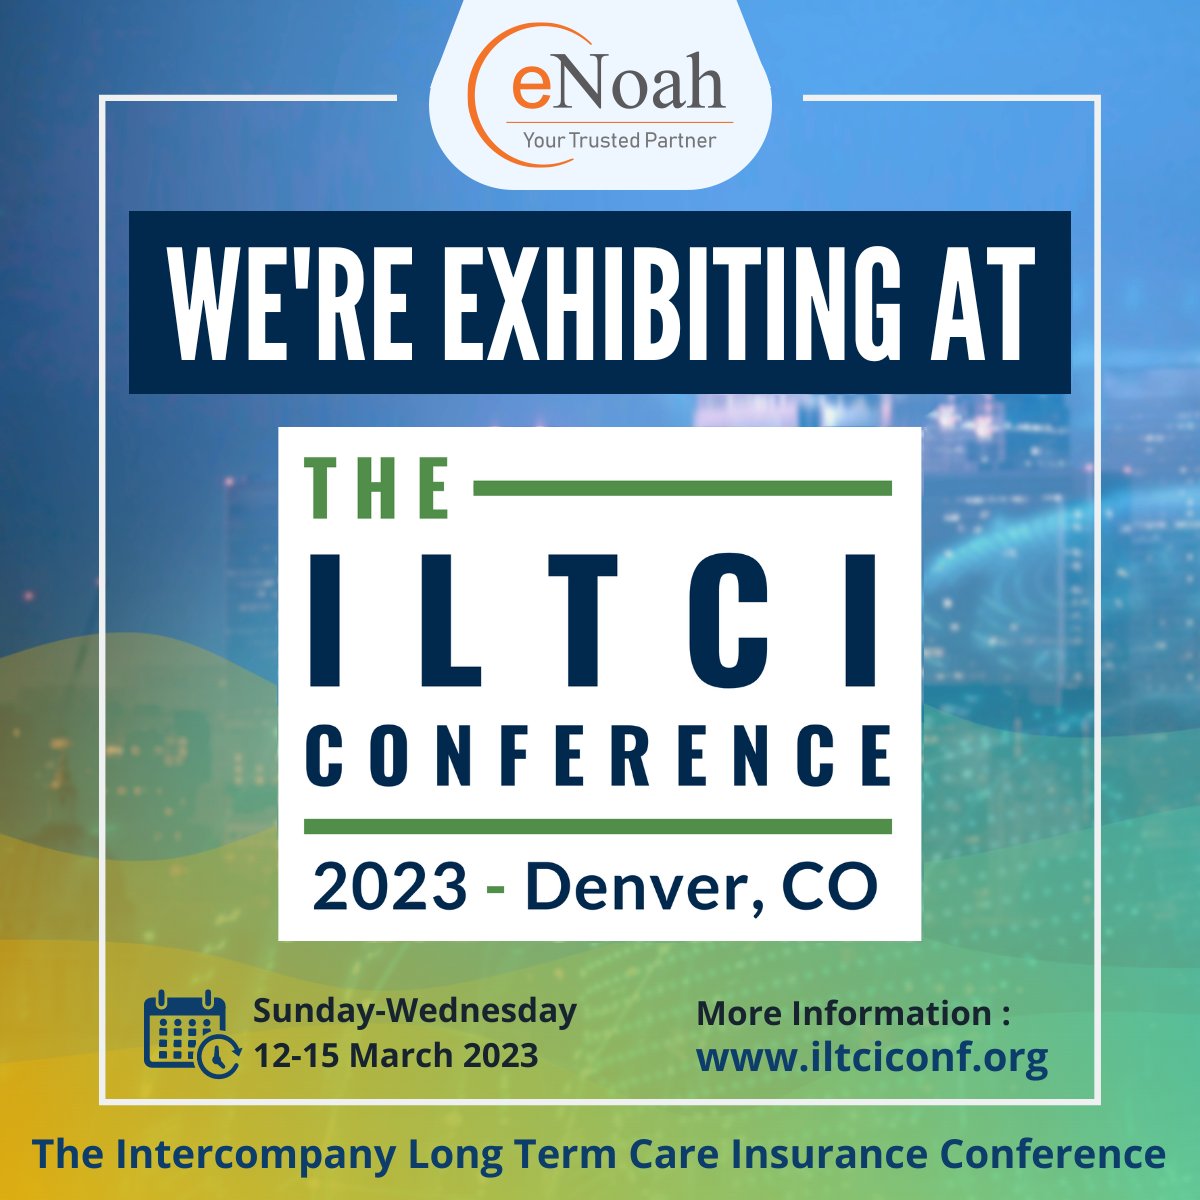 eNoah is excited and proud to be an @ILTCI exhibitor, looking forward to meeting you all in Denver on 12-15 March 2023.
#iltci #iltci2023 #ltc #longtermcare #tech #iltci #Insurance #backofficesupport #itservices